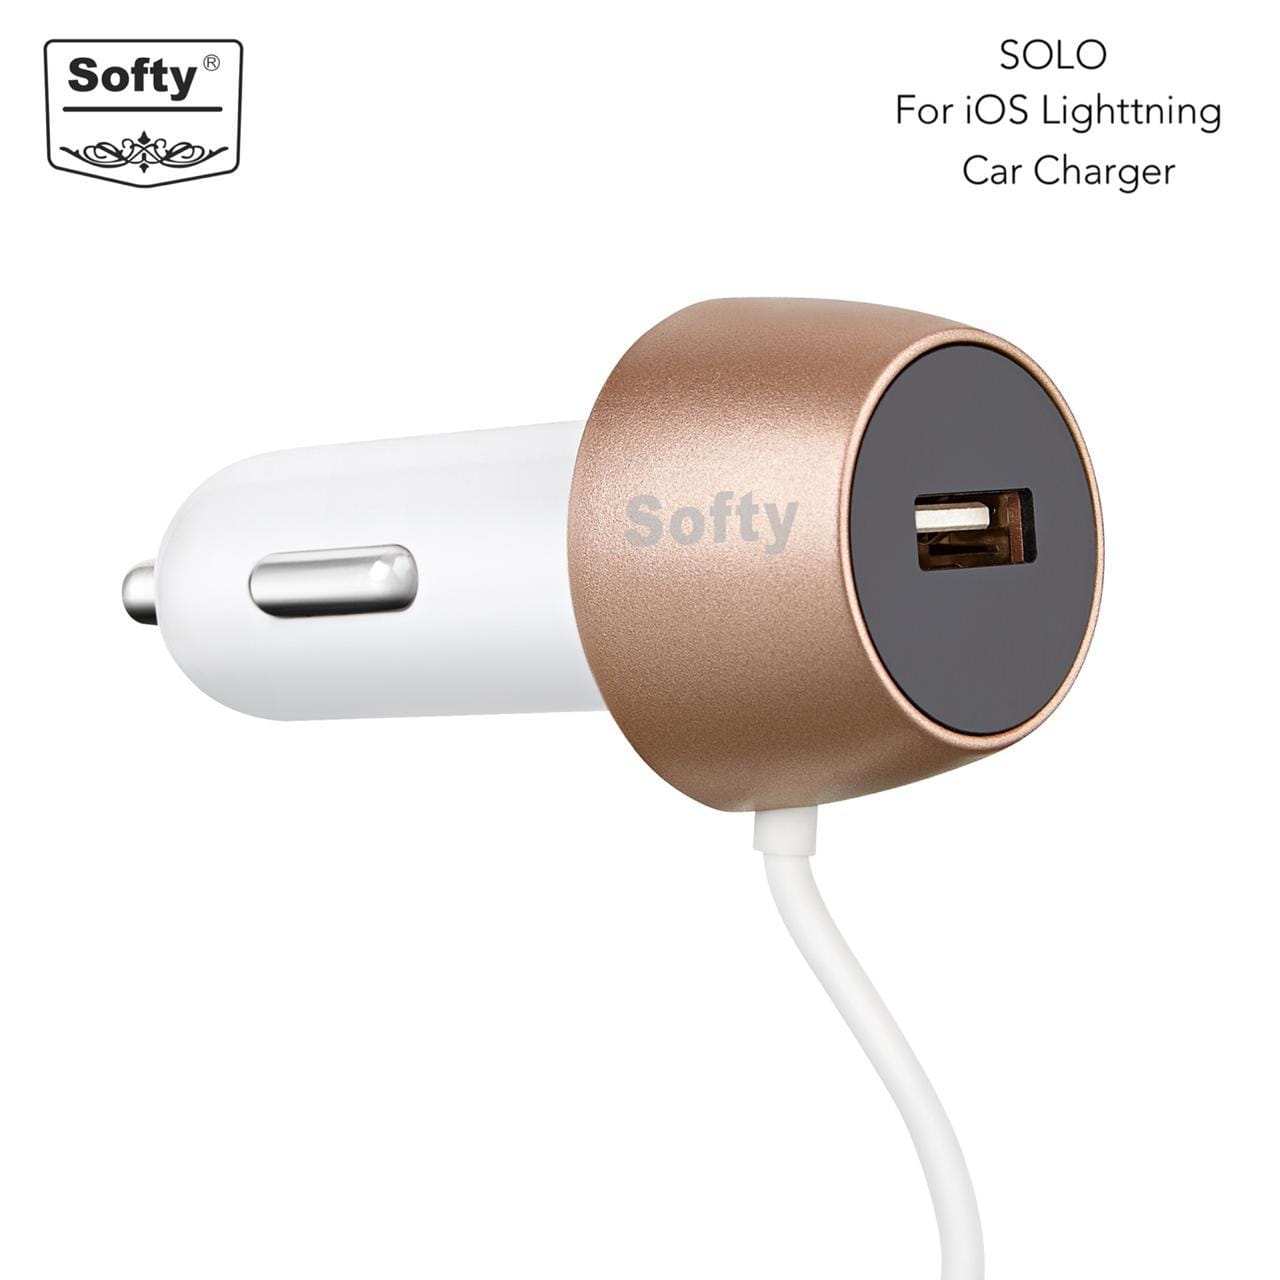 Softy premium quality 2.1-Amp iphone car charger with wire-USB CAR CHARGERS-dealsplant